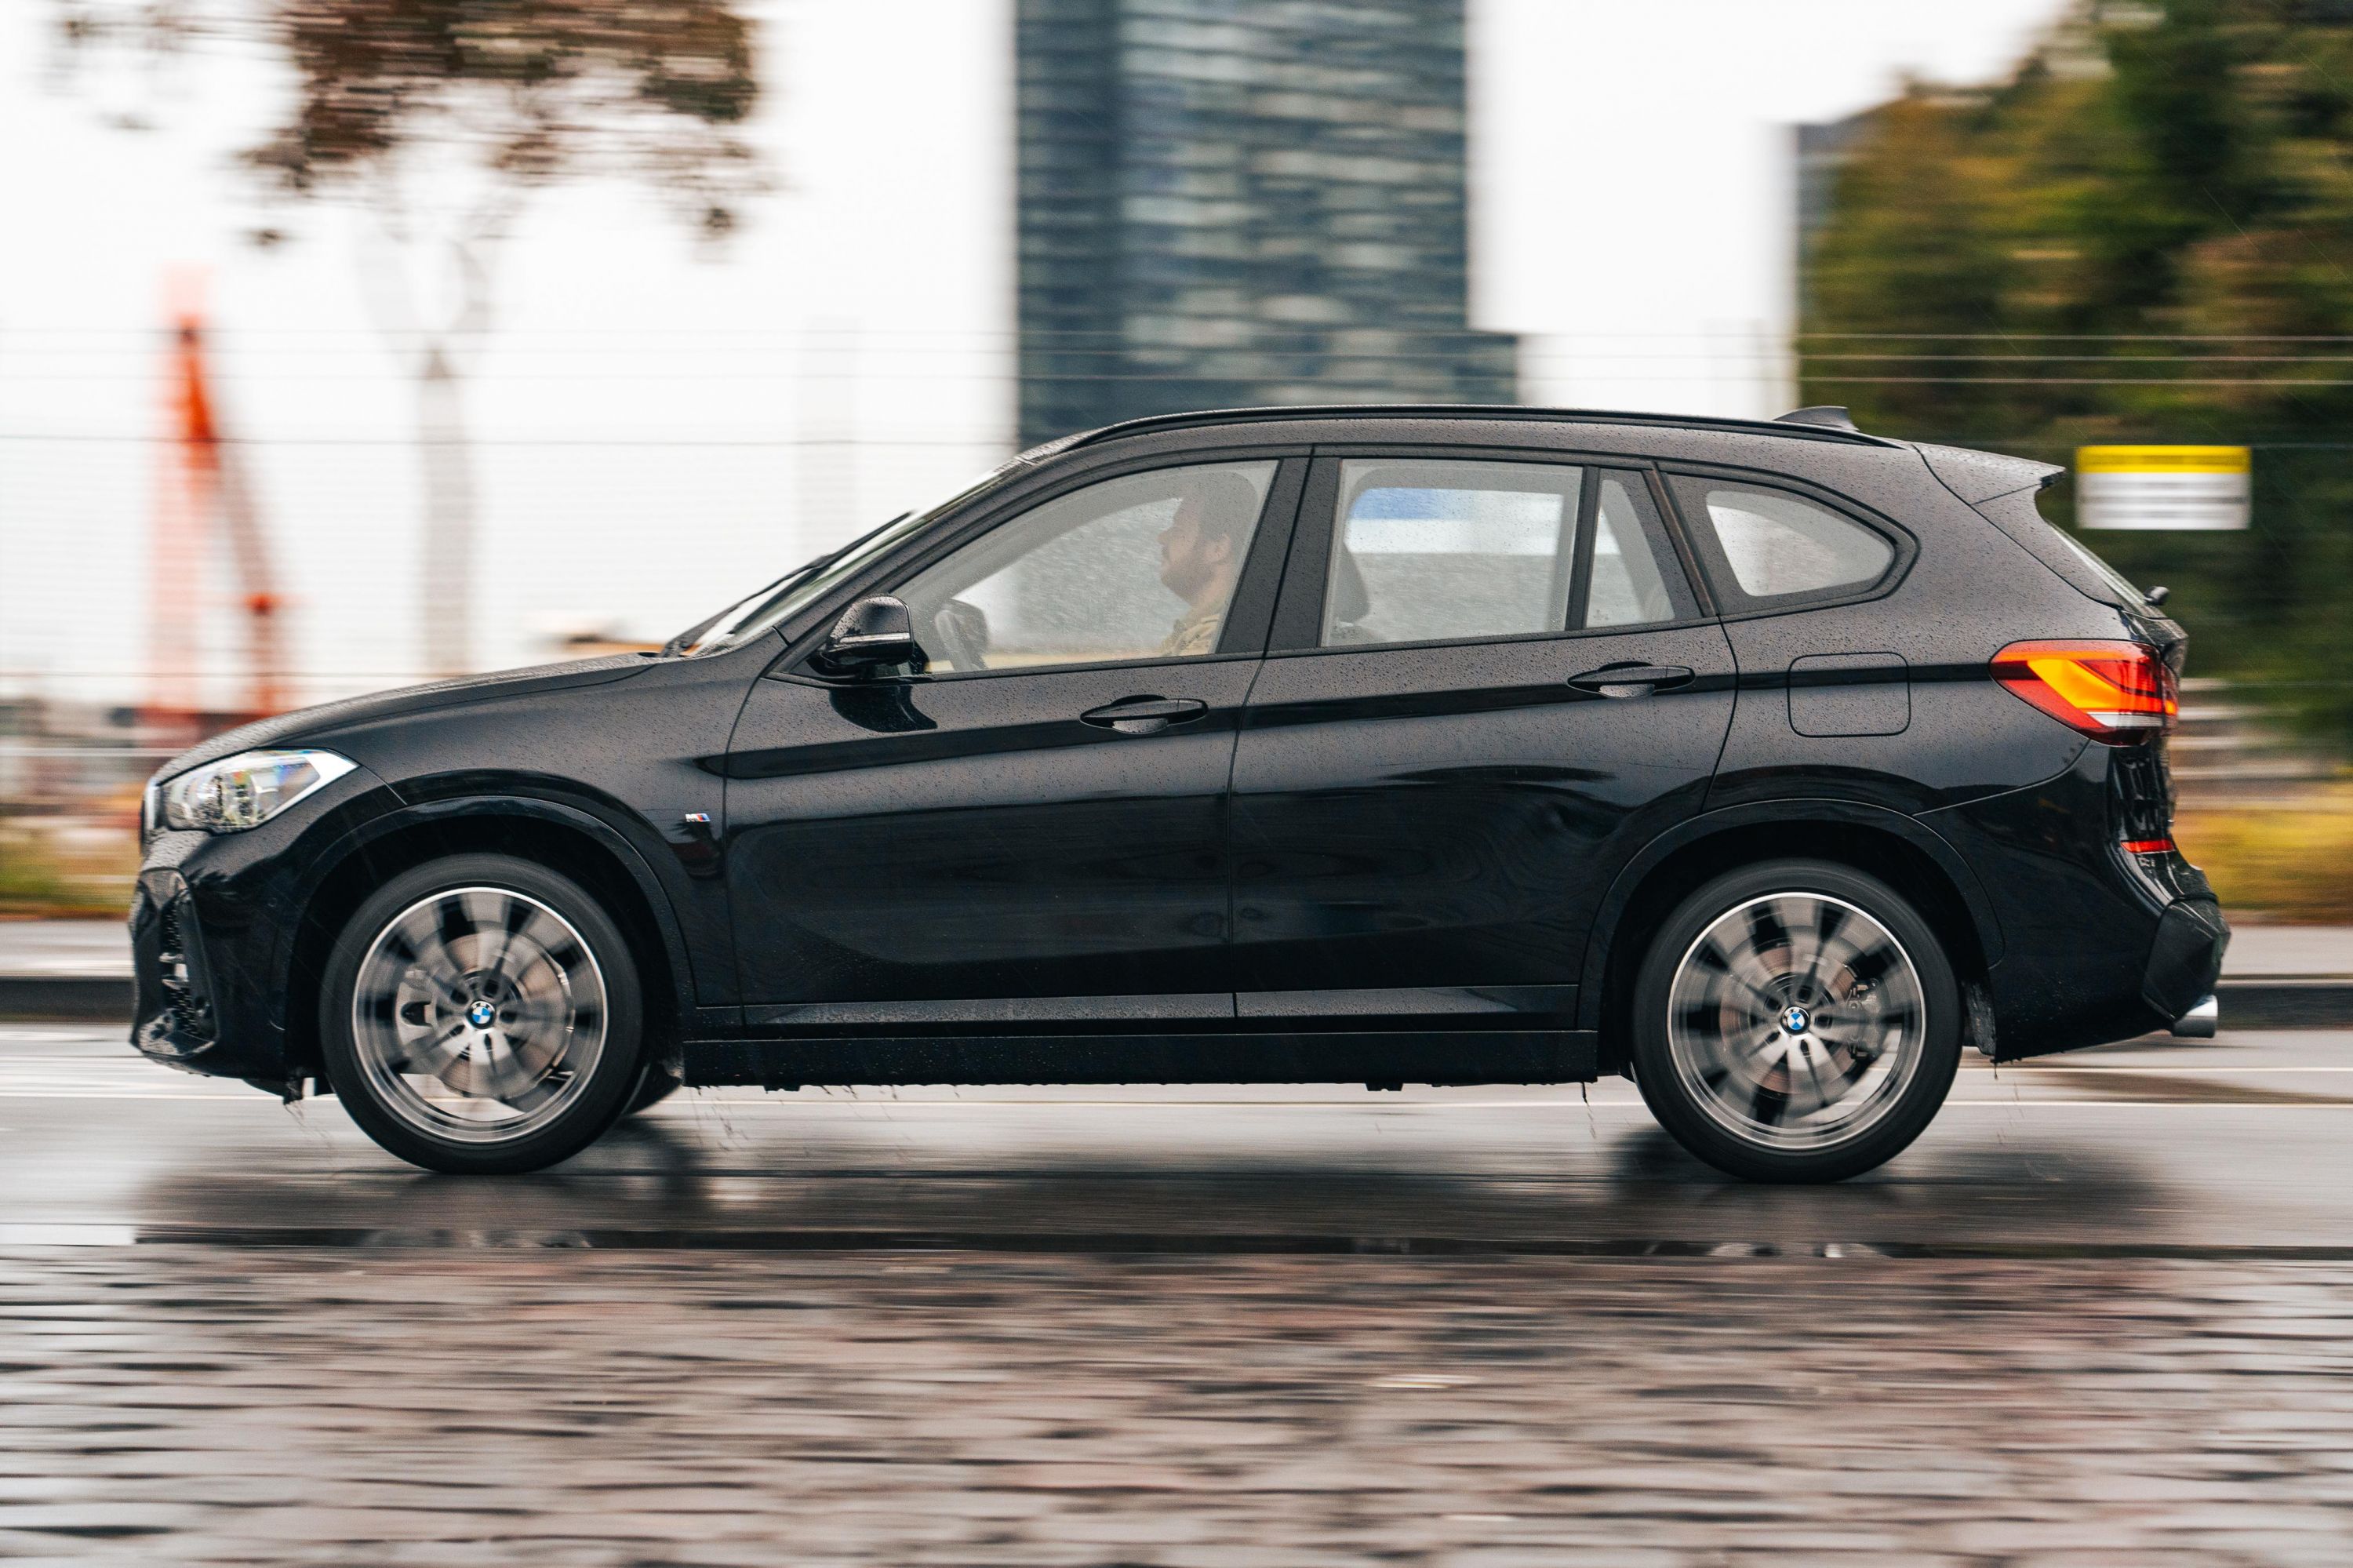 BMW X1 review: really quite average – the electric version even